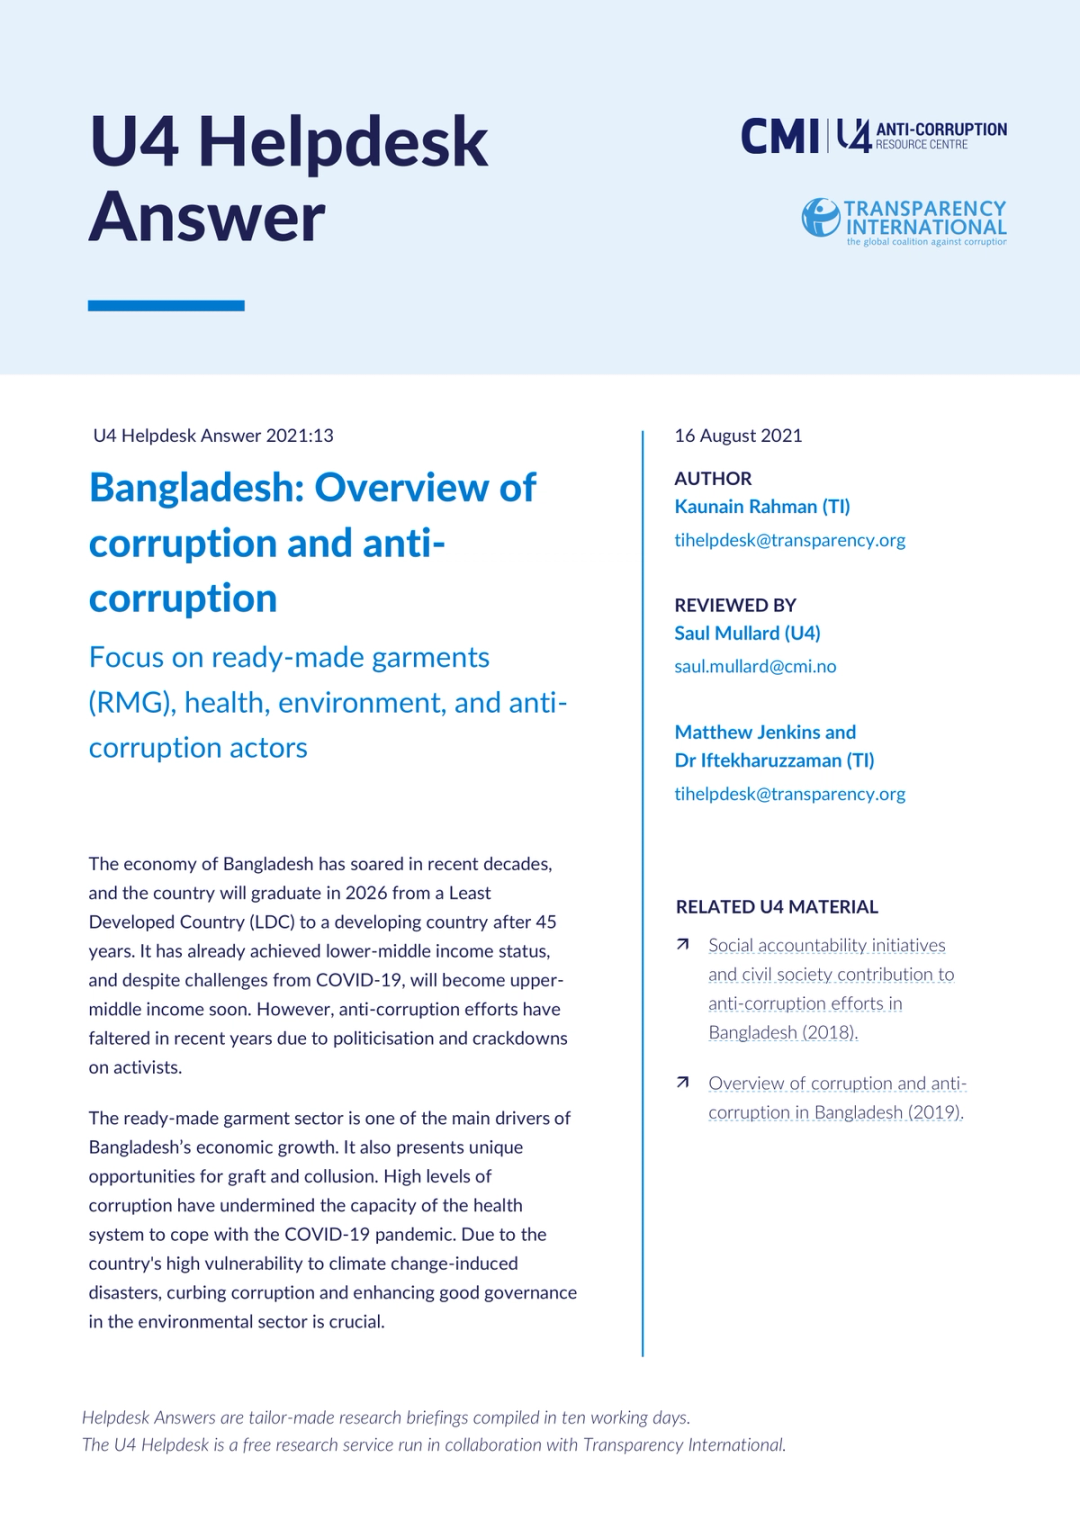 Bangladesh Overview of corruption and anticorruption